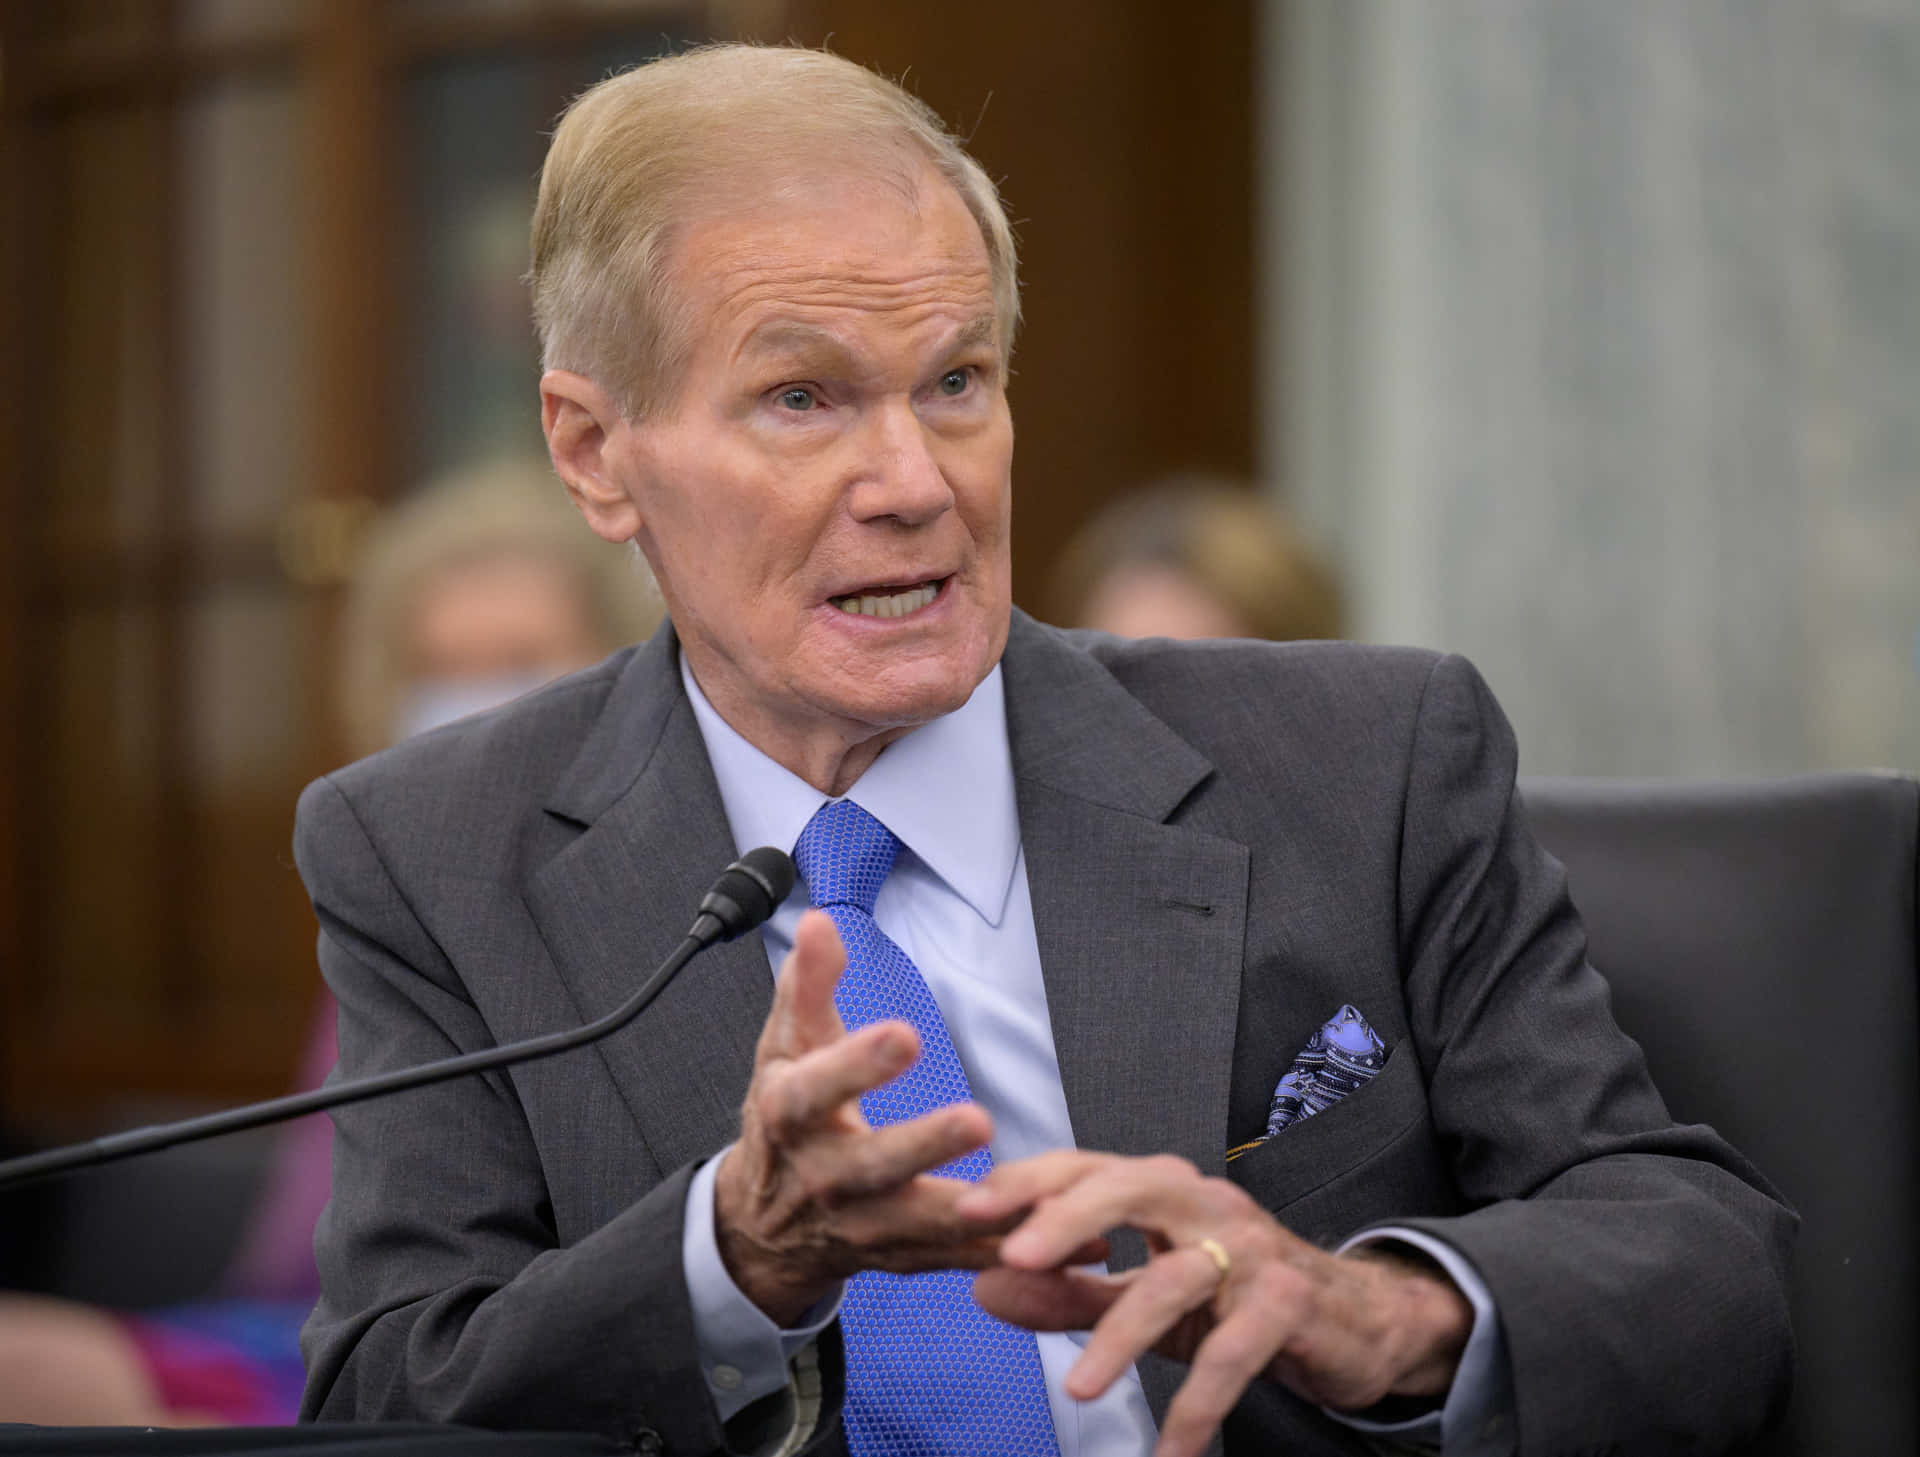 Bill Nelson Dressed in a Gray Suit with a Blue Tie. Wallpaper